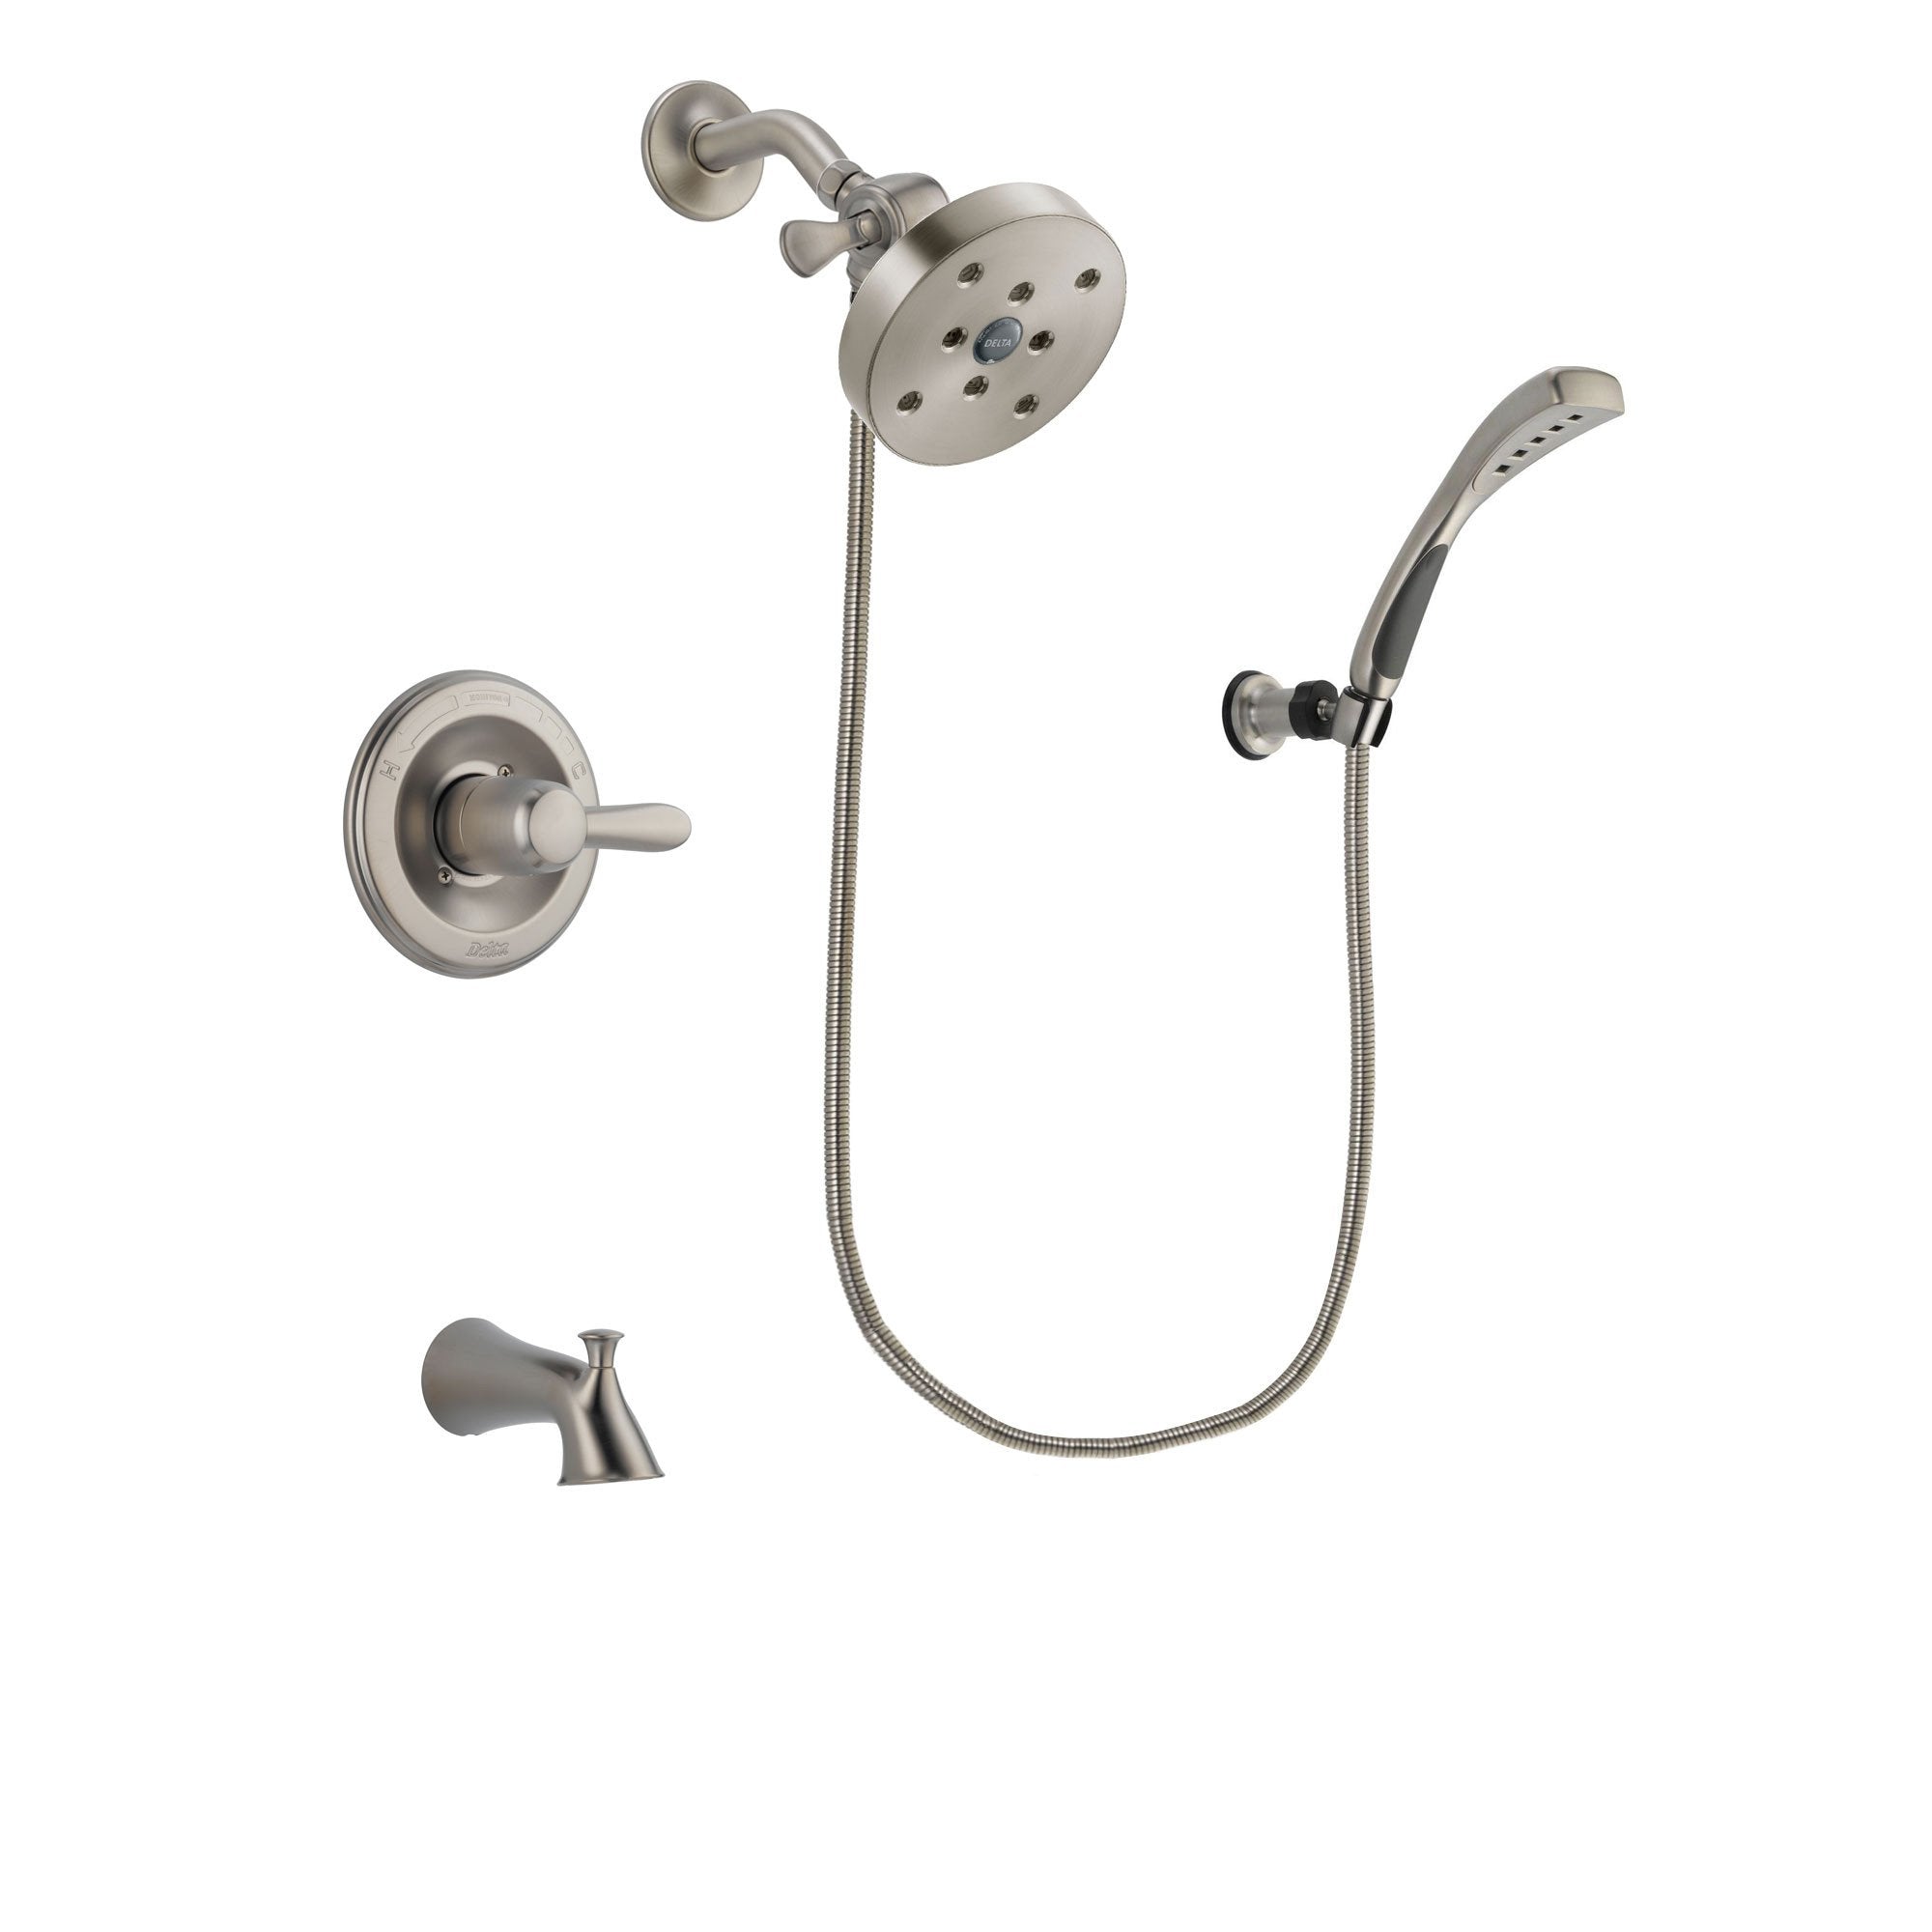 Delta Lahara Stainless Steel Finish Tub and Shower Faucet System Package with 5-1/2 inch Shower Head and Wall Mounted Handshower Includes Rough-in Valve and Tub Spout DSP1897V